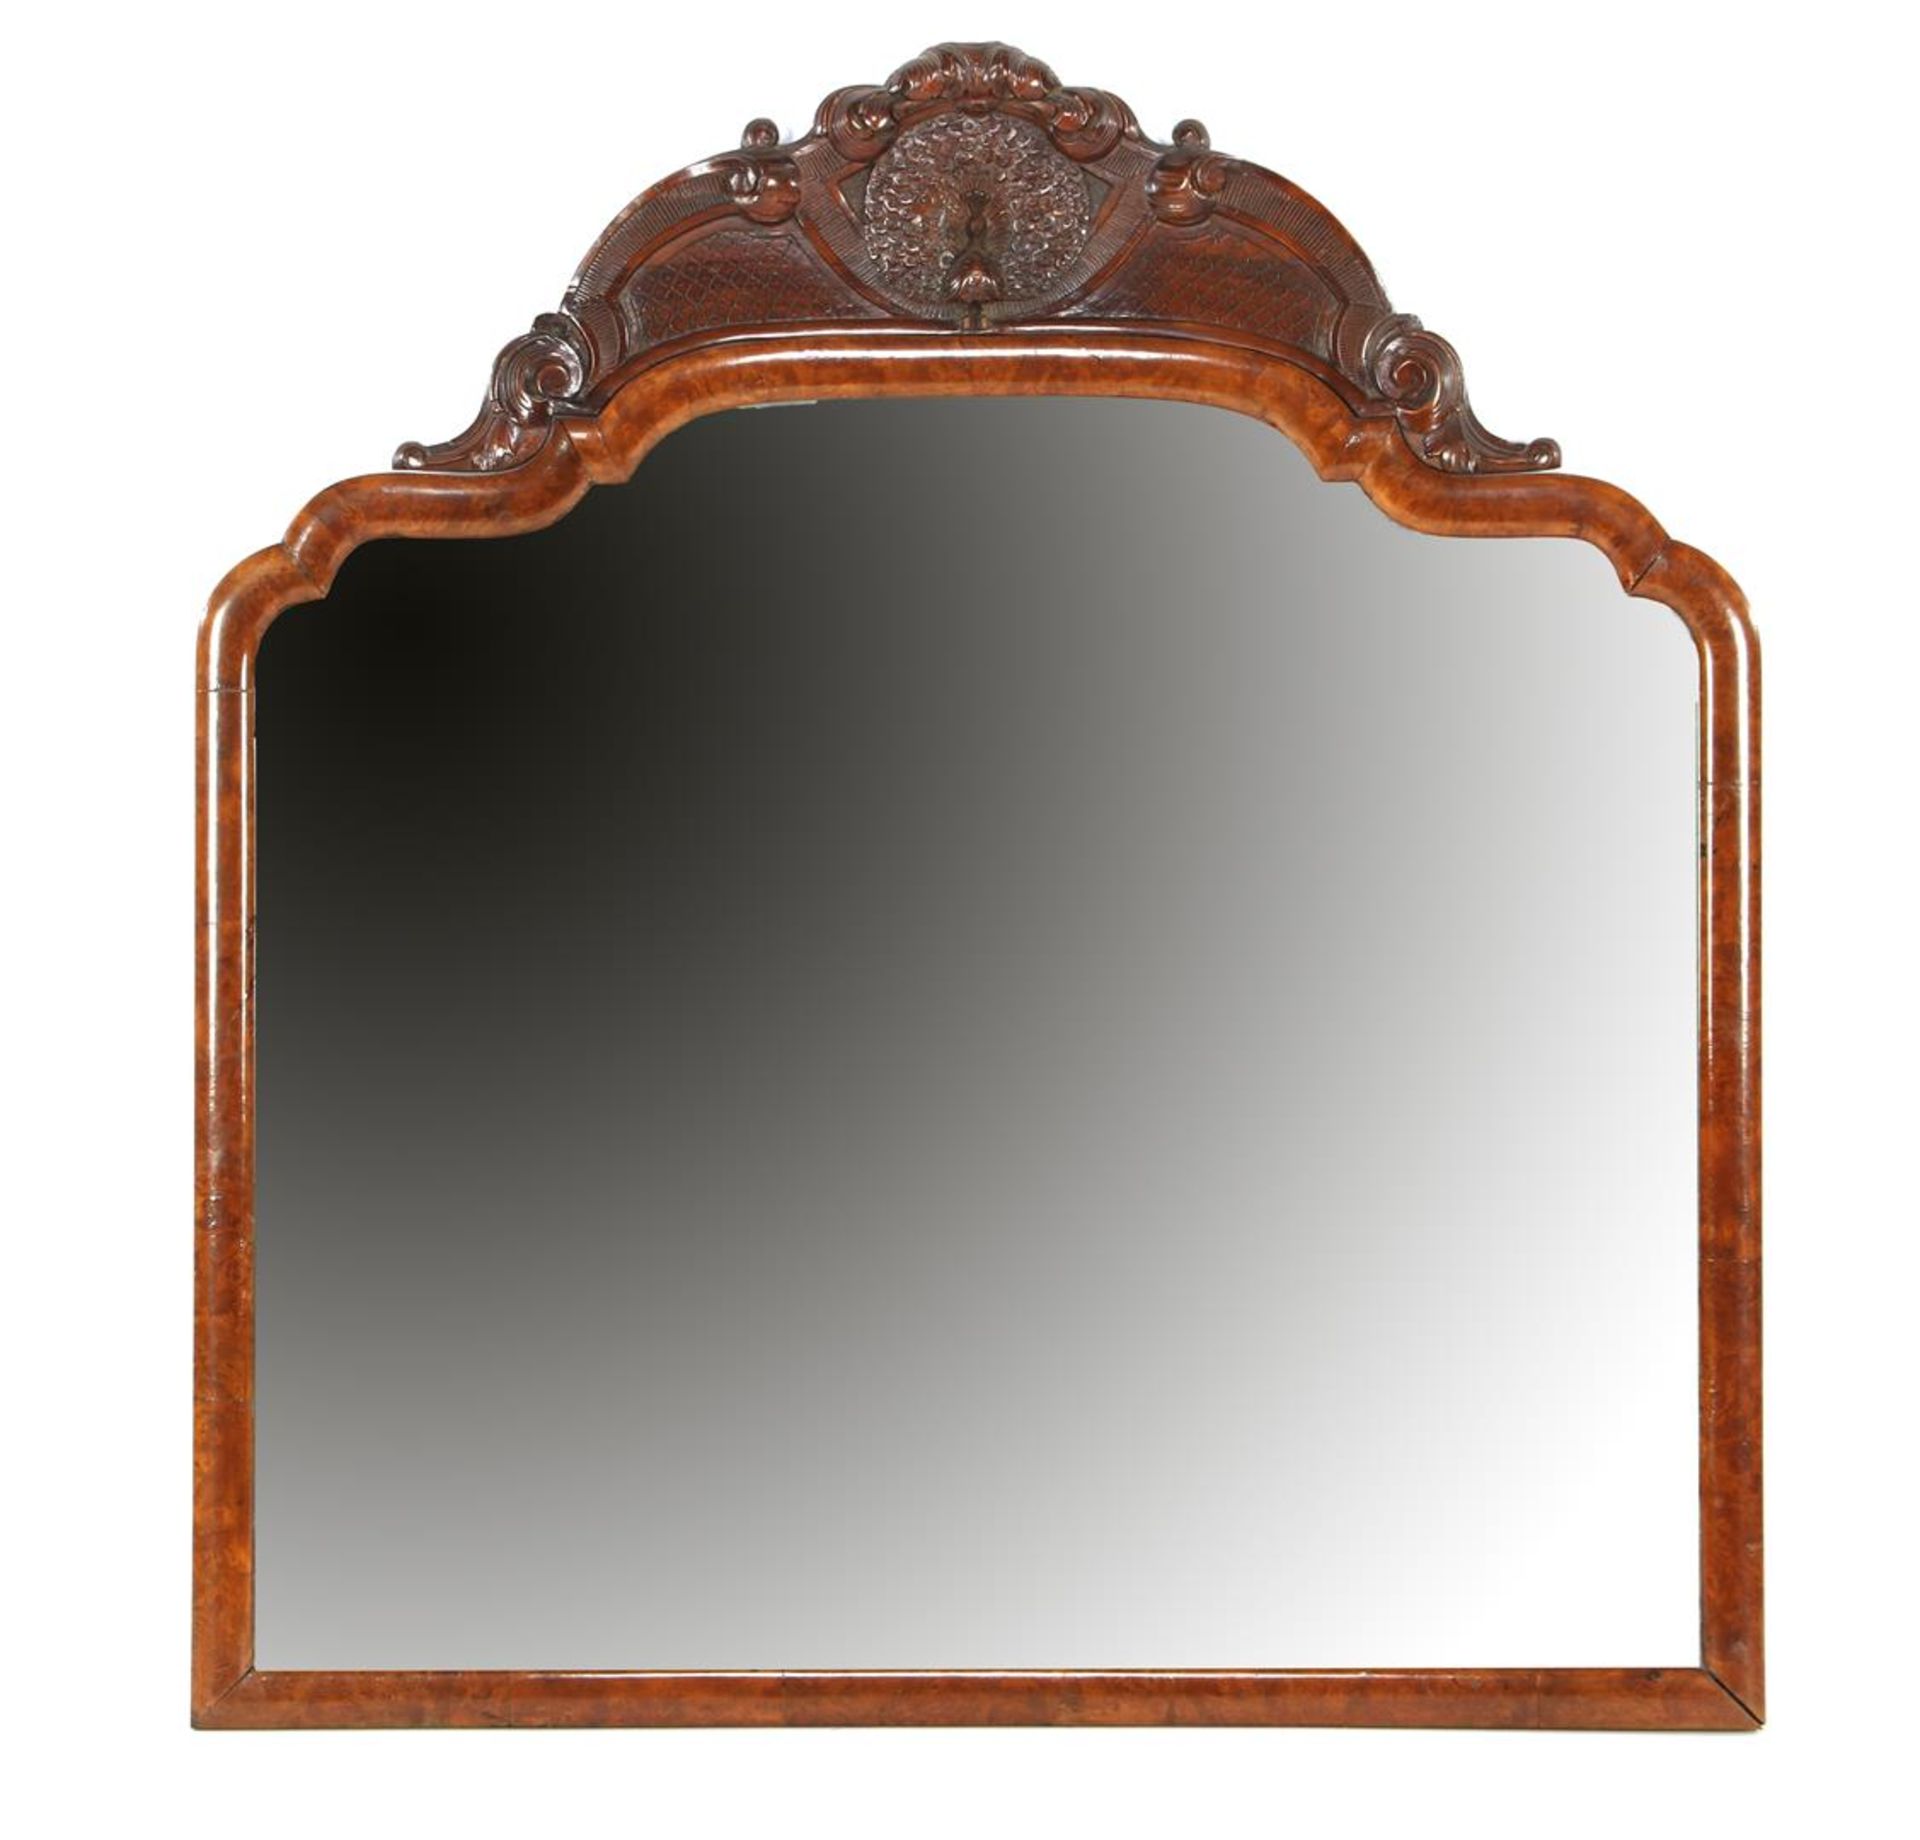 Faceted Soester mirror in burr walnut veneer frame with decorated crest